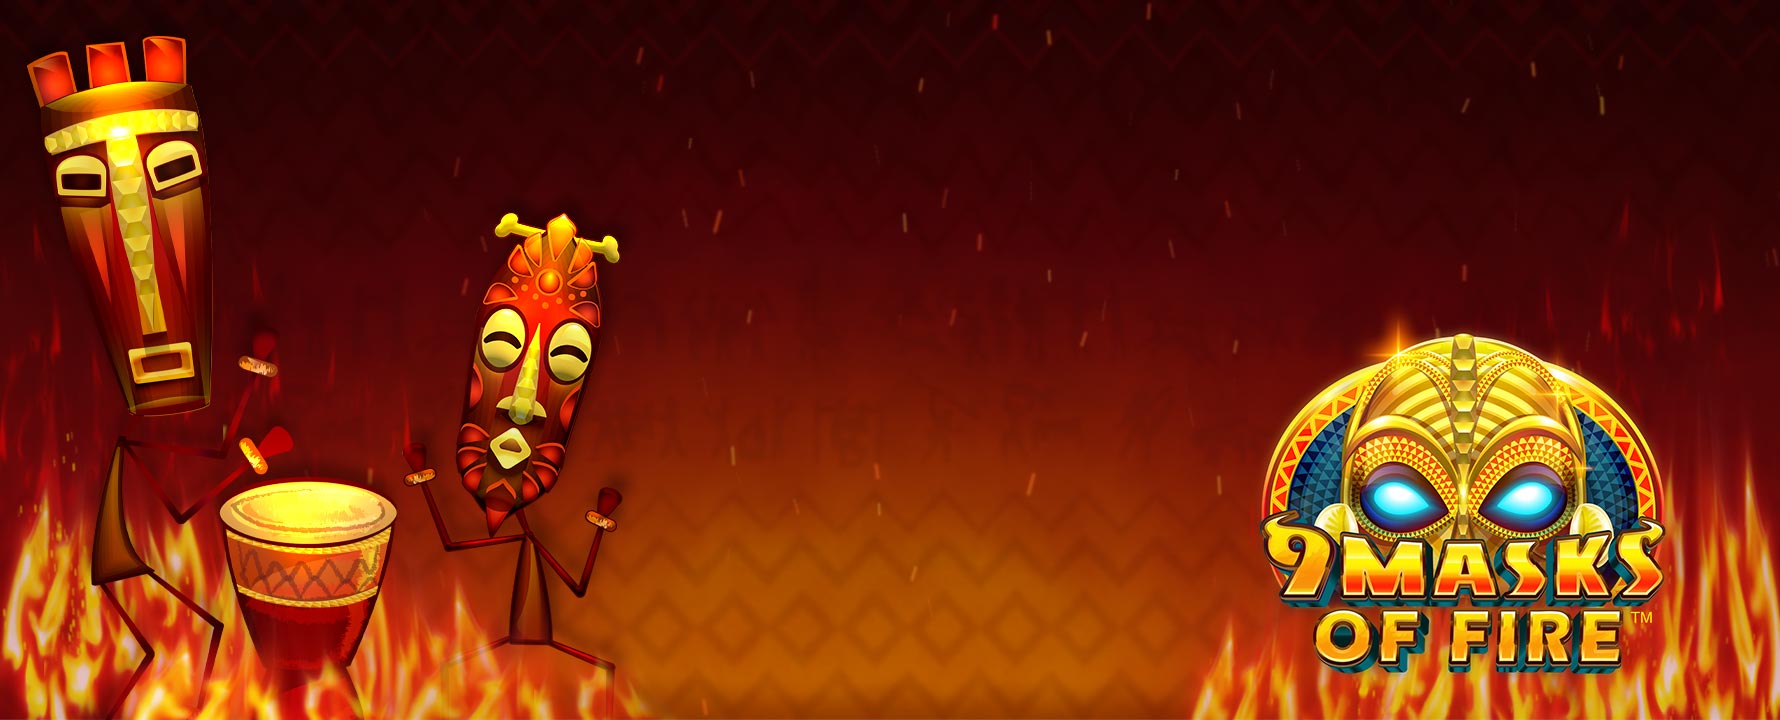 Introducing the 9 Masks of Fire™ online slot from Microgaming